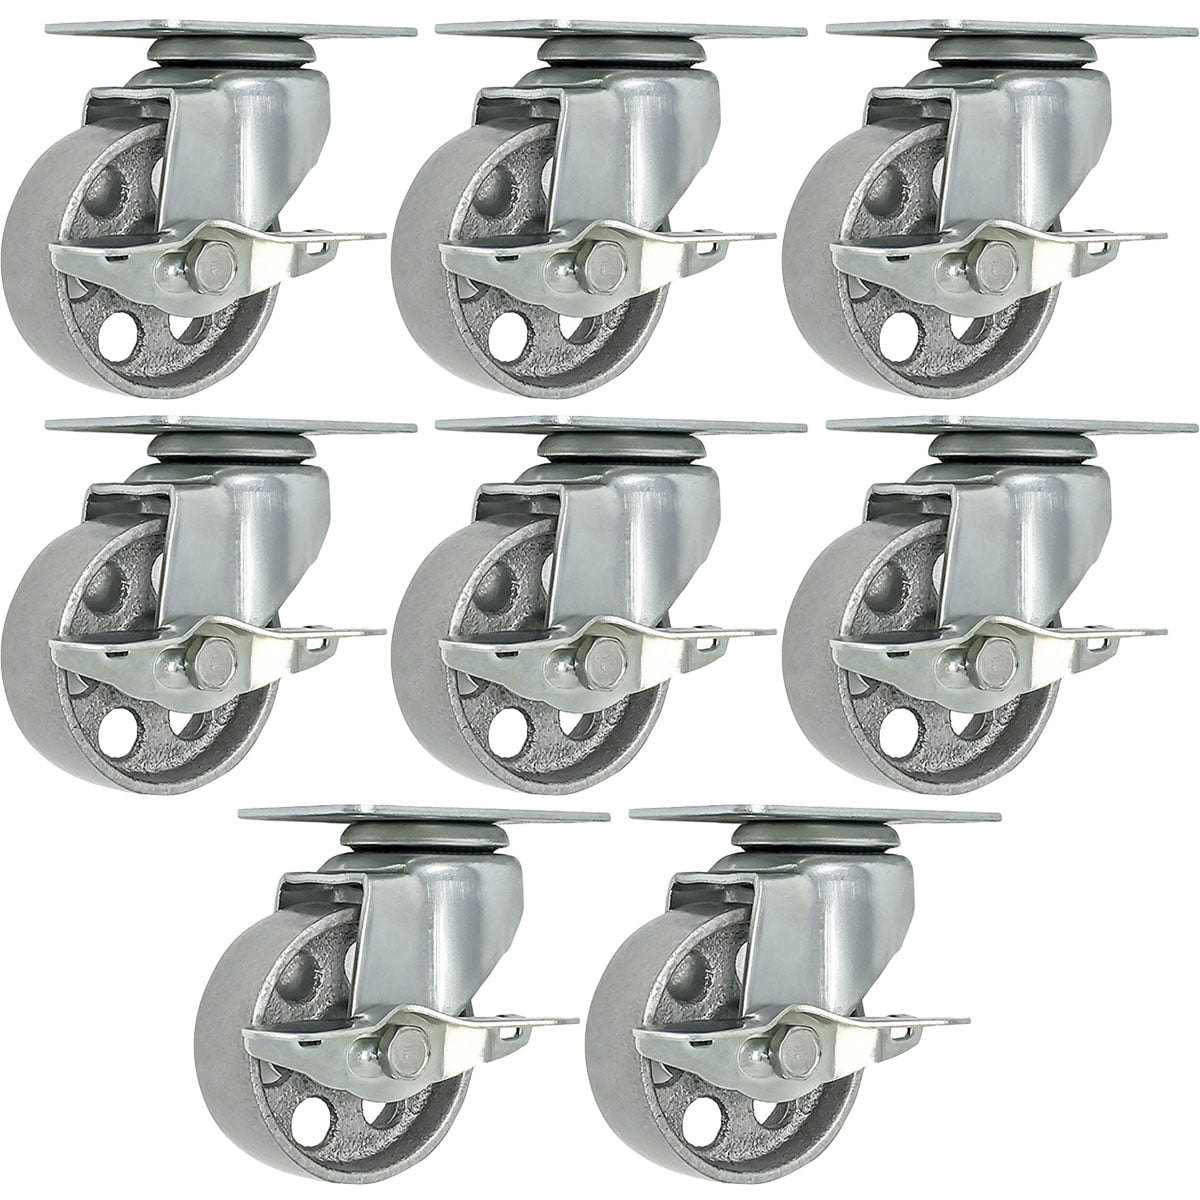 Set of 8 All Steel Swivel Plate Casters and 4 with Brake Lock 3" Wheel 